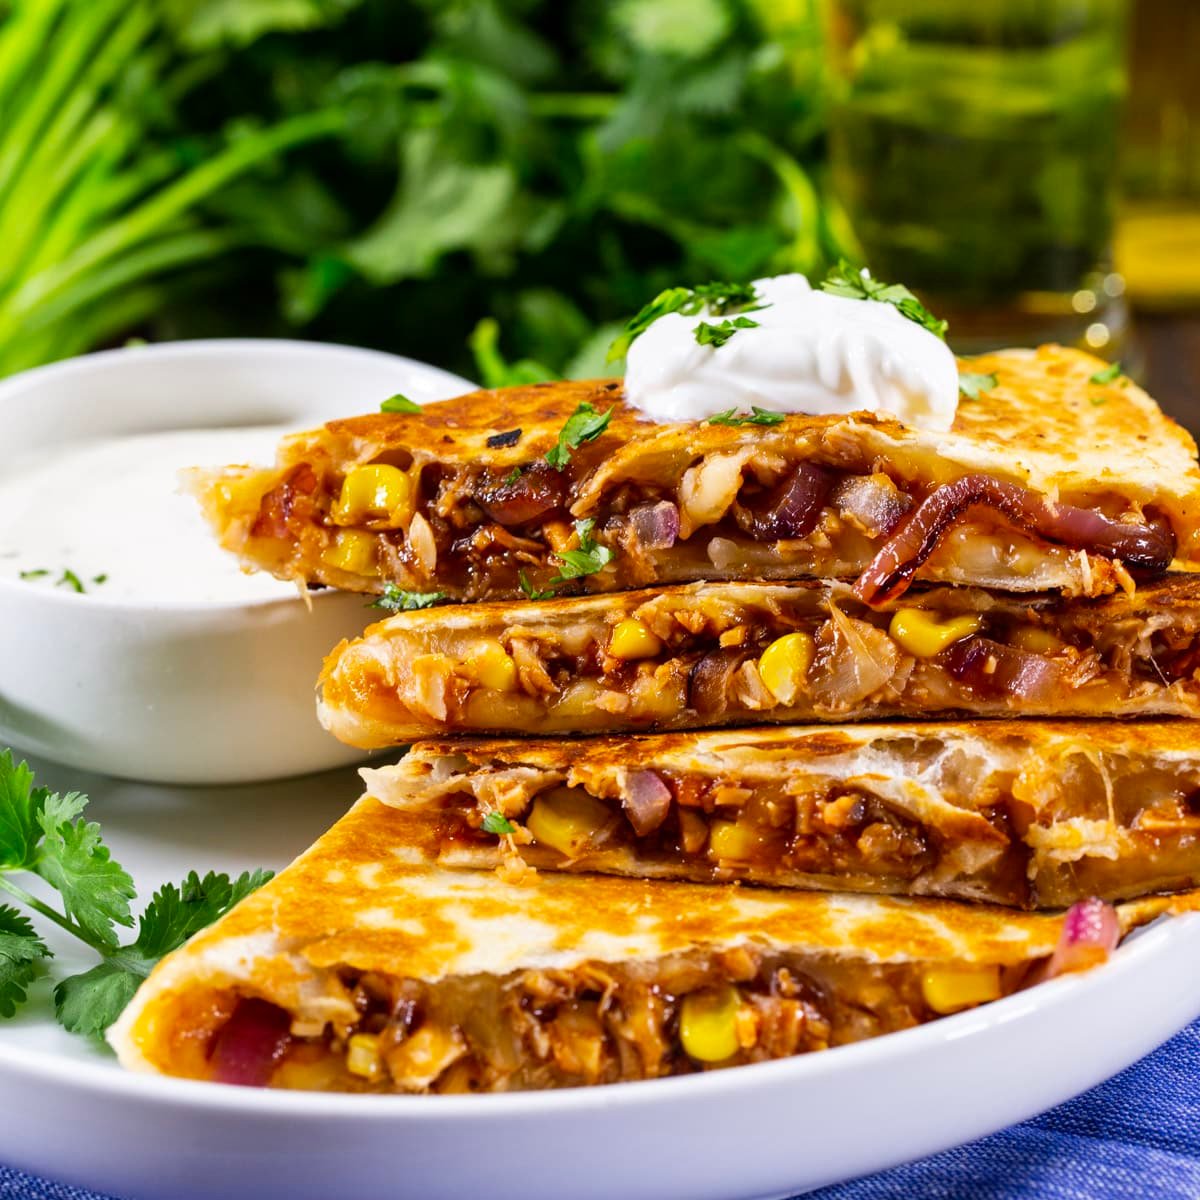 BBQ Chicken Quesadilla cut into wedges and topped with sour cream.